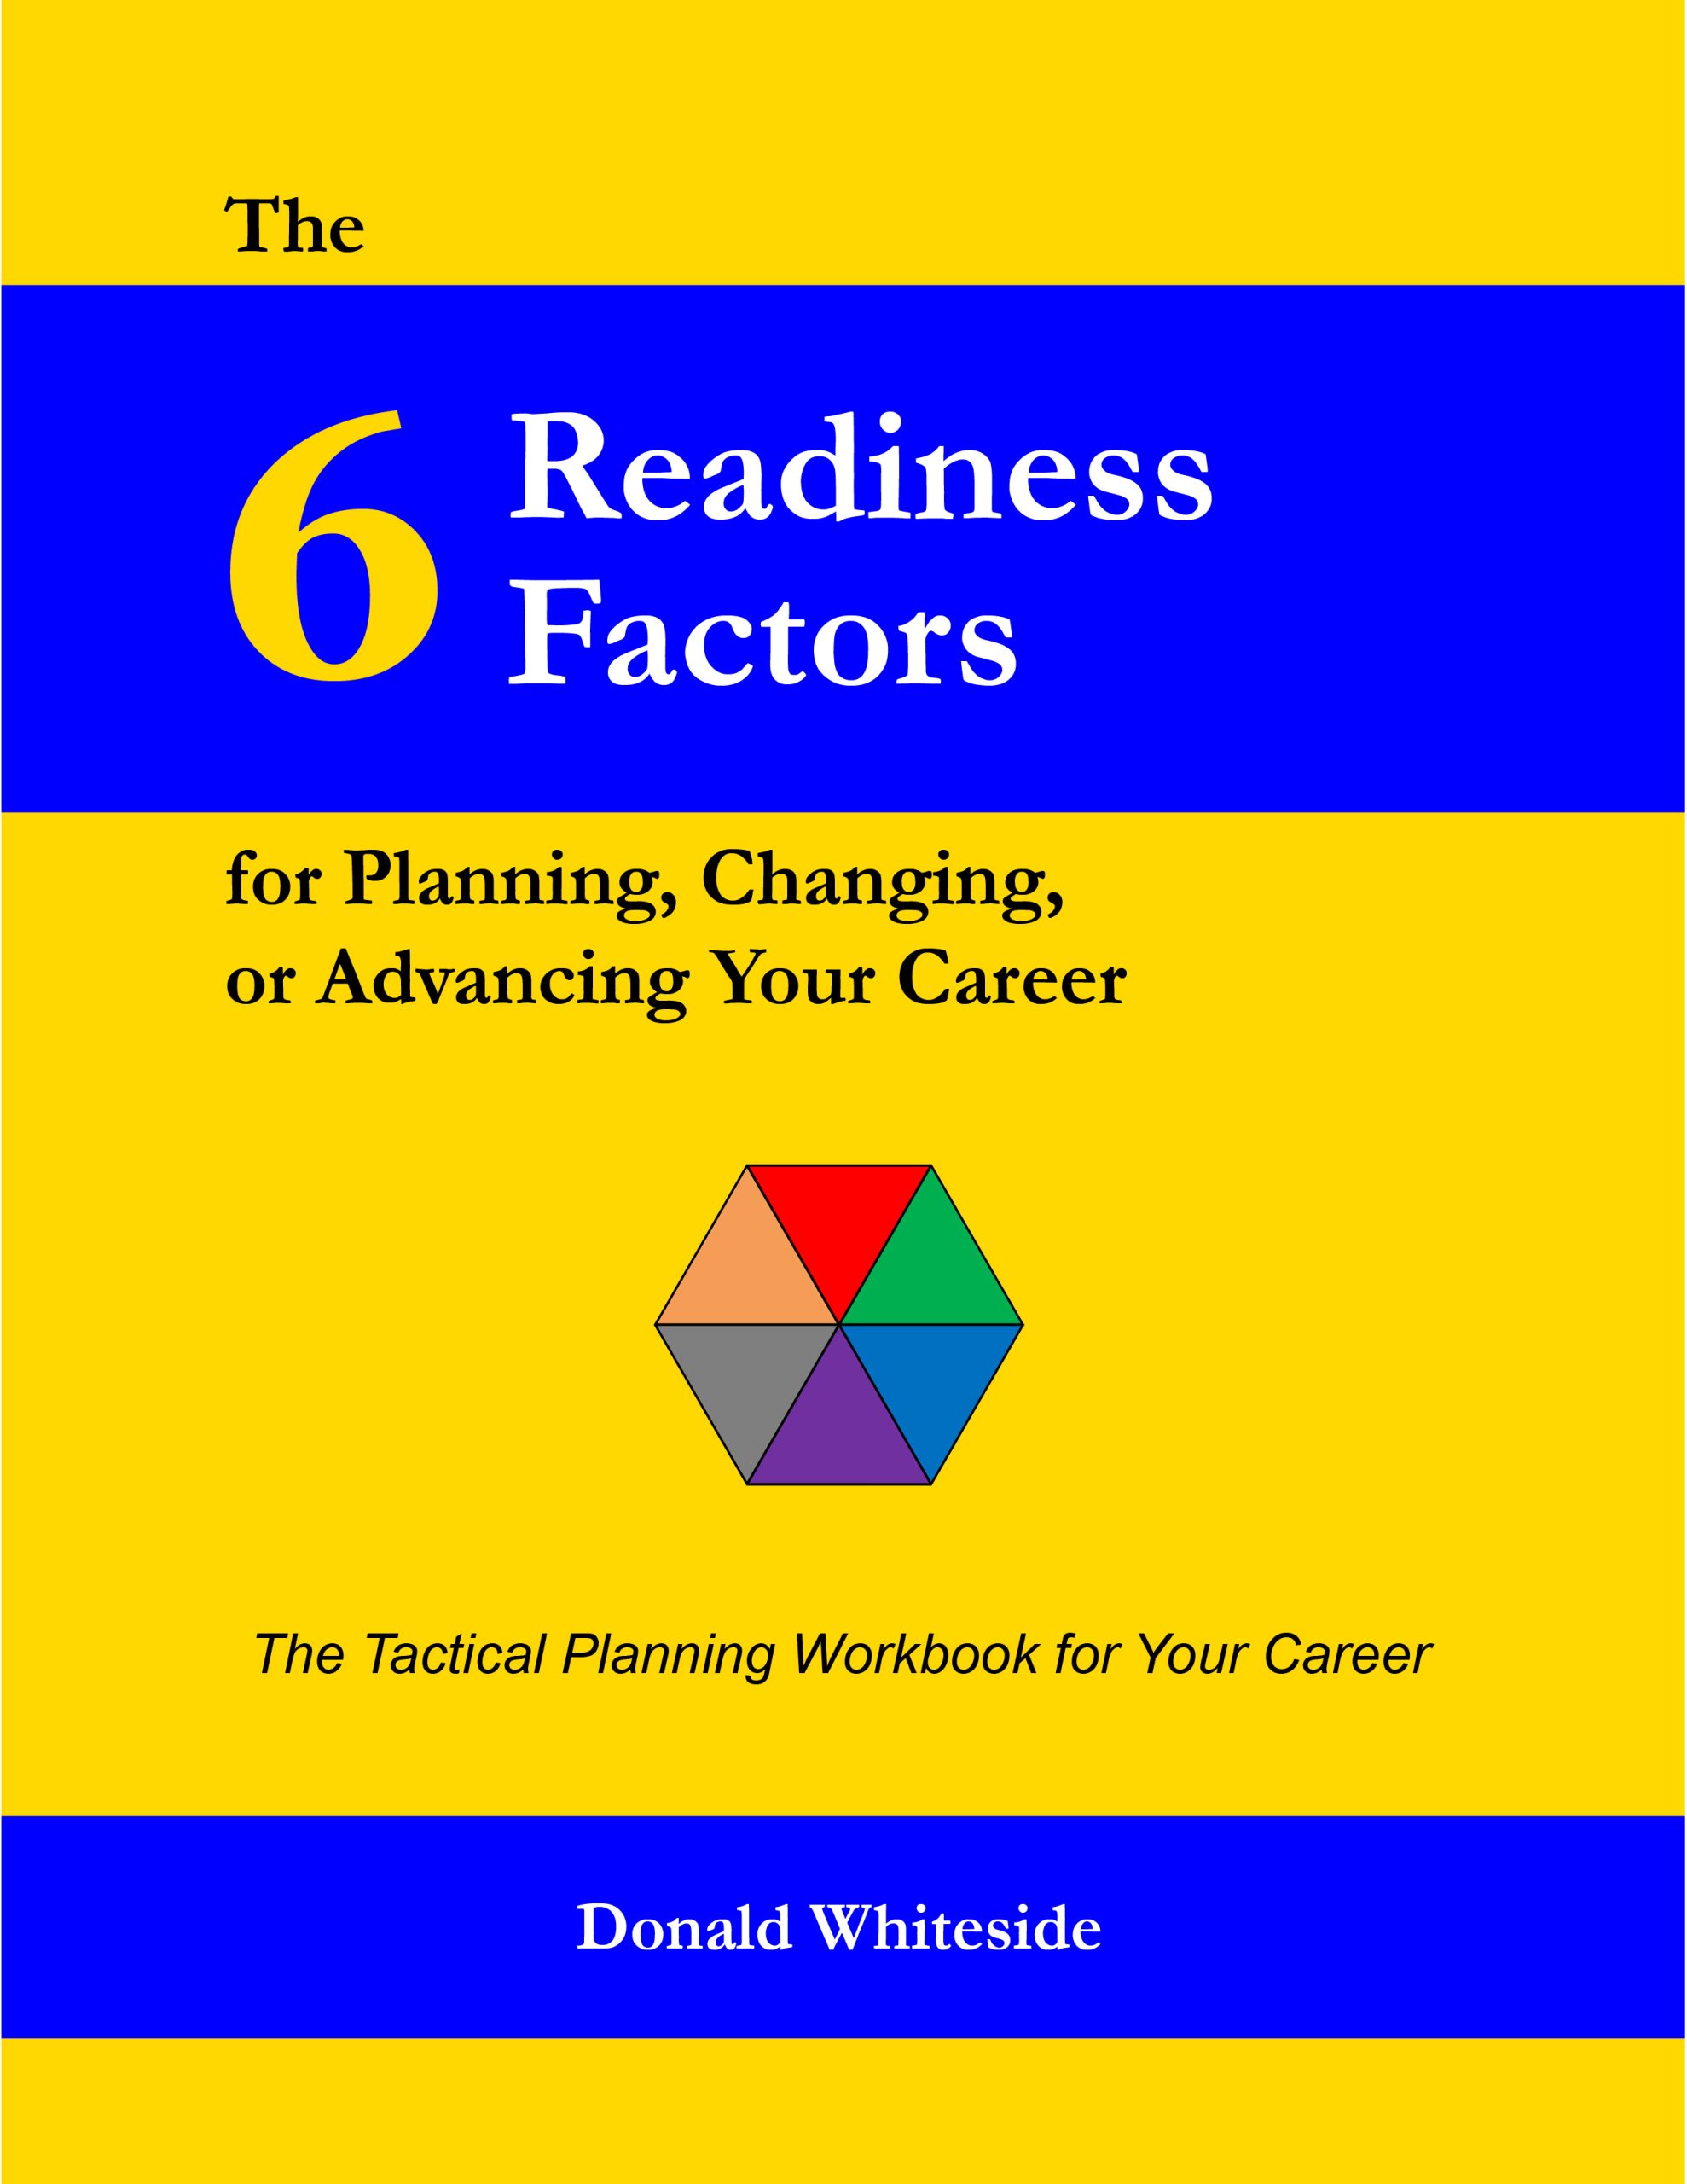 Cover of "6 Readiness Factors for Planning, Changing, or Advancing Your Career."